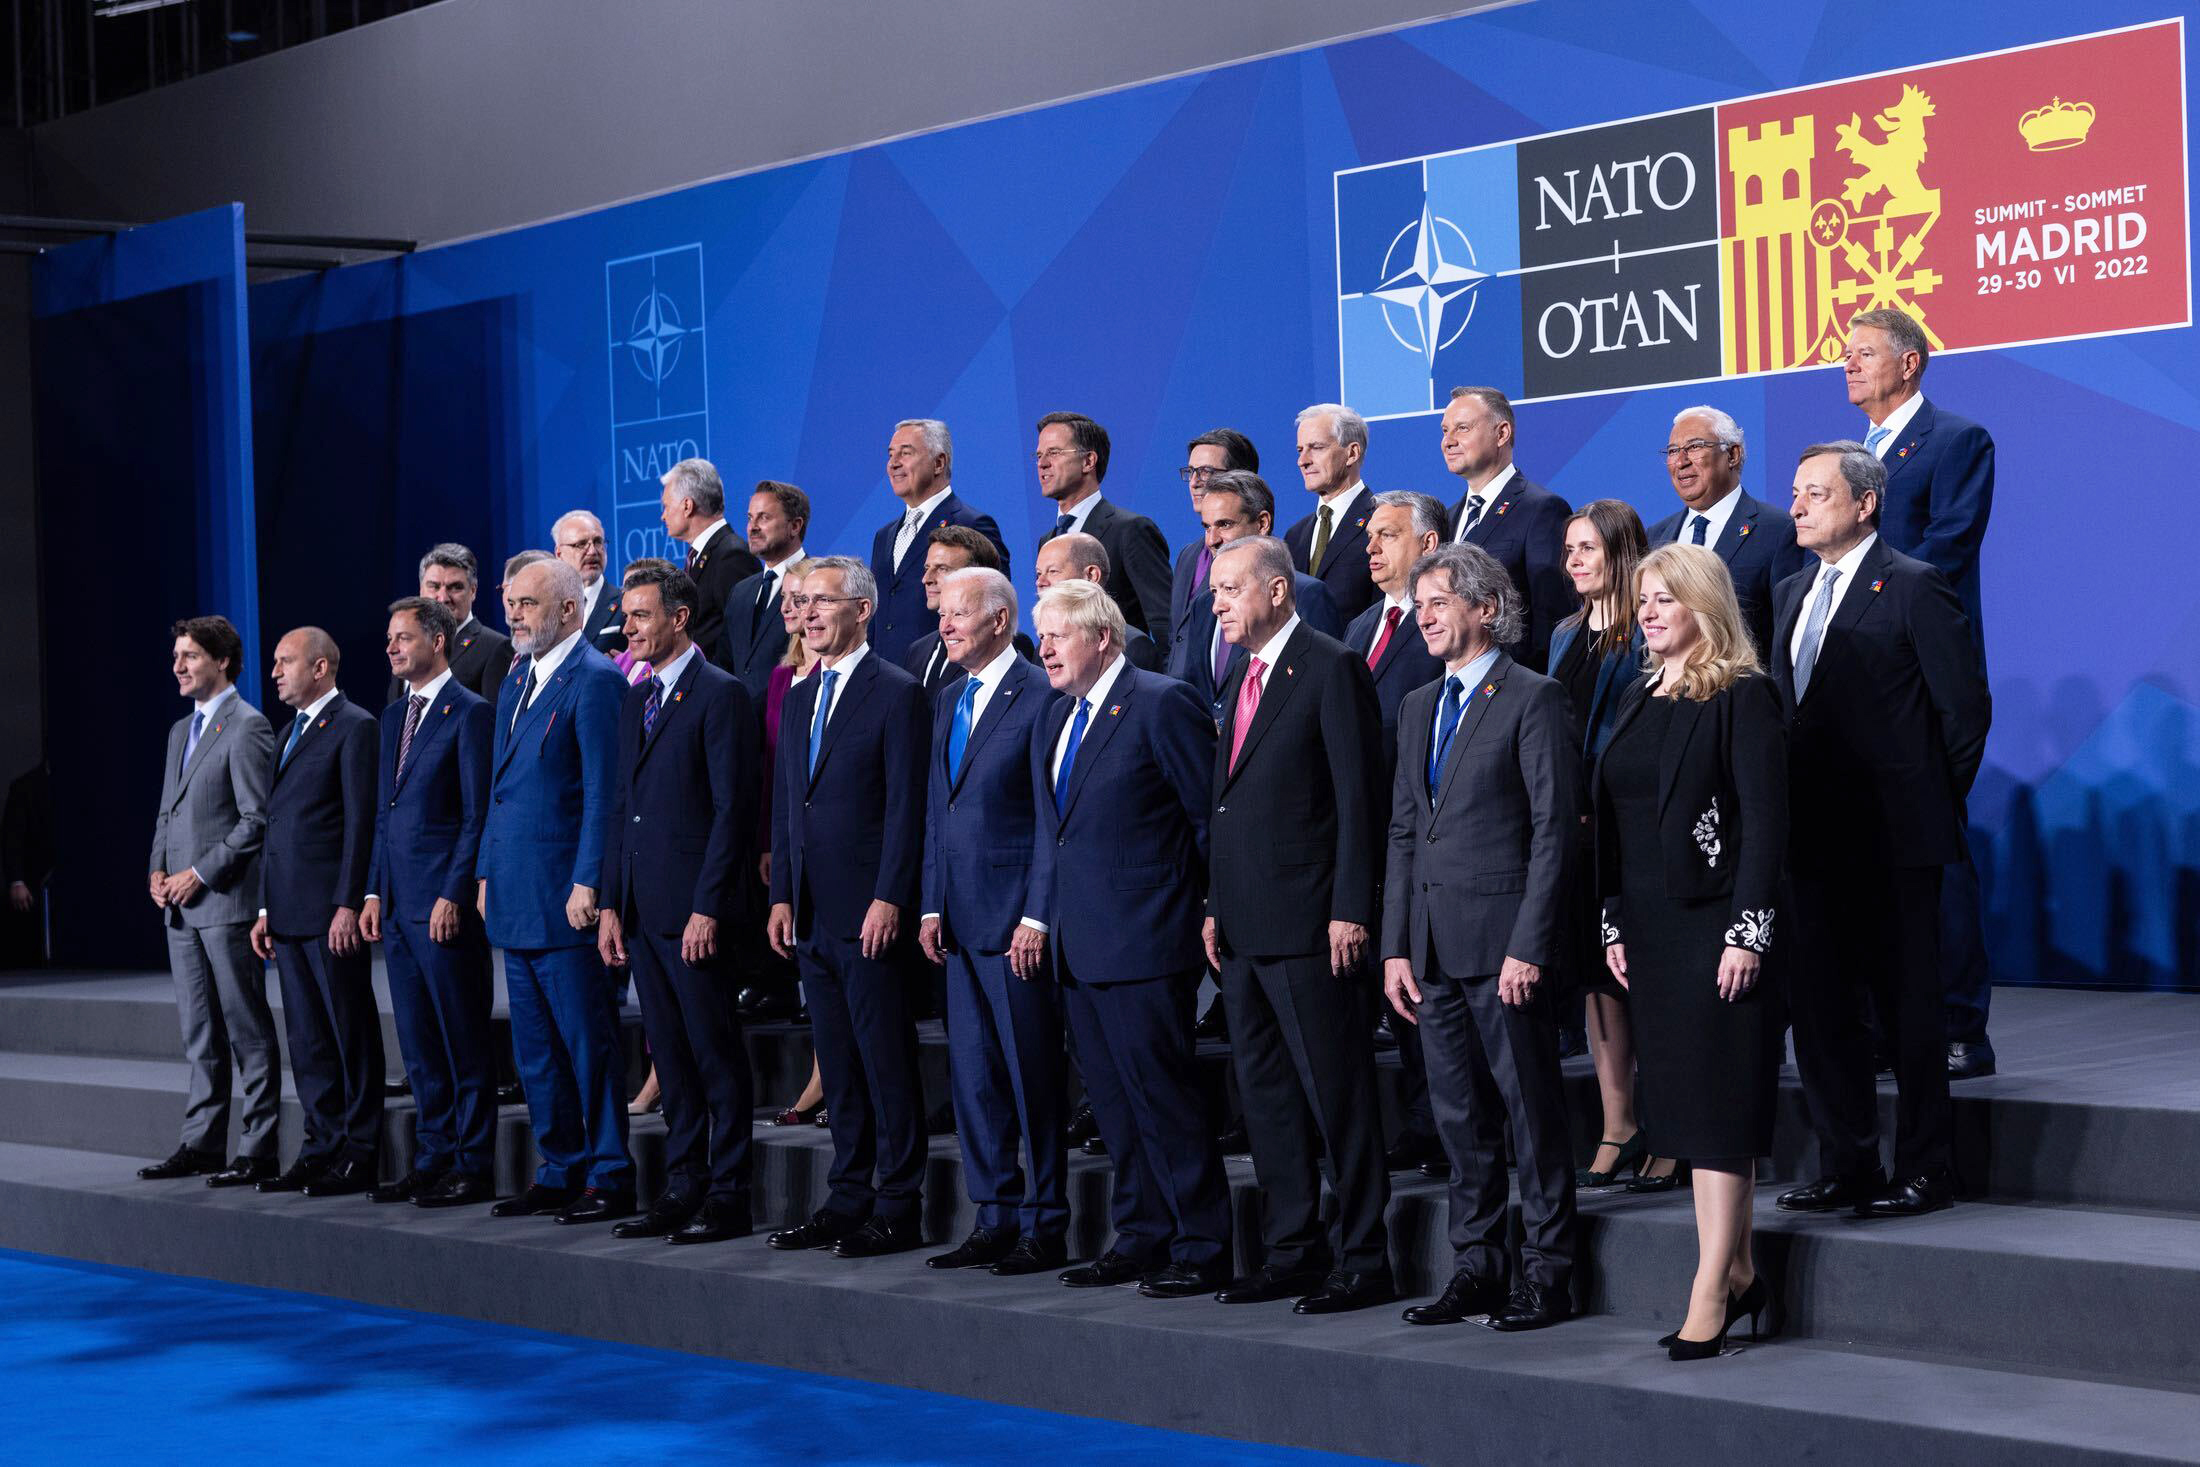 Official portrait of NATO heads of state and government in Madrid, June 29, 2022.